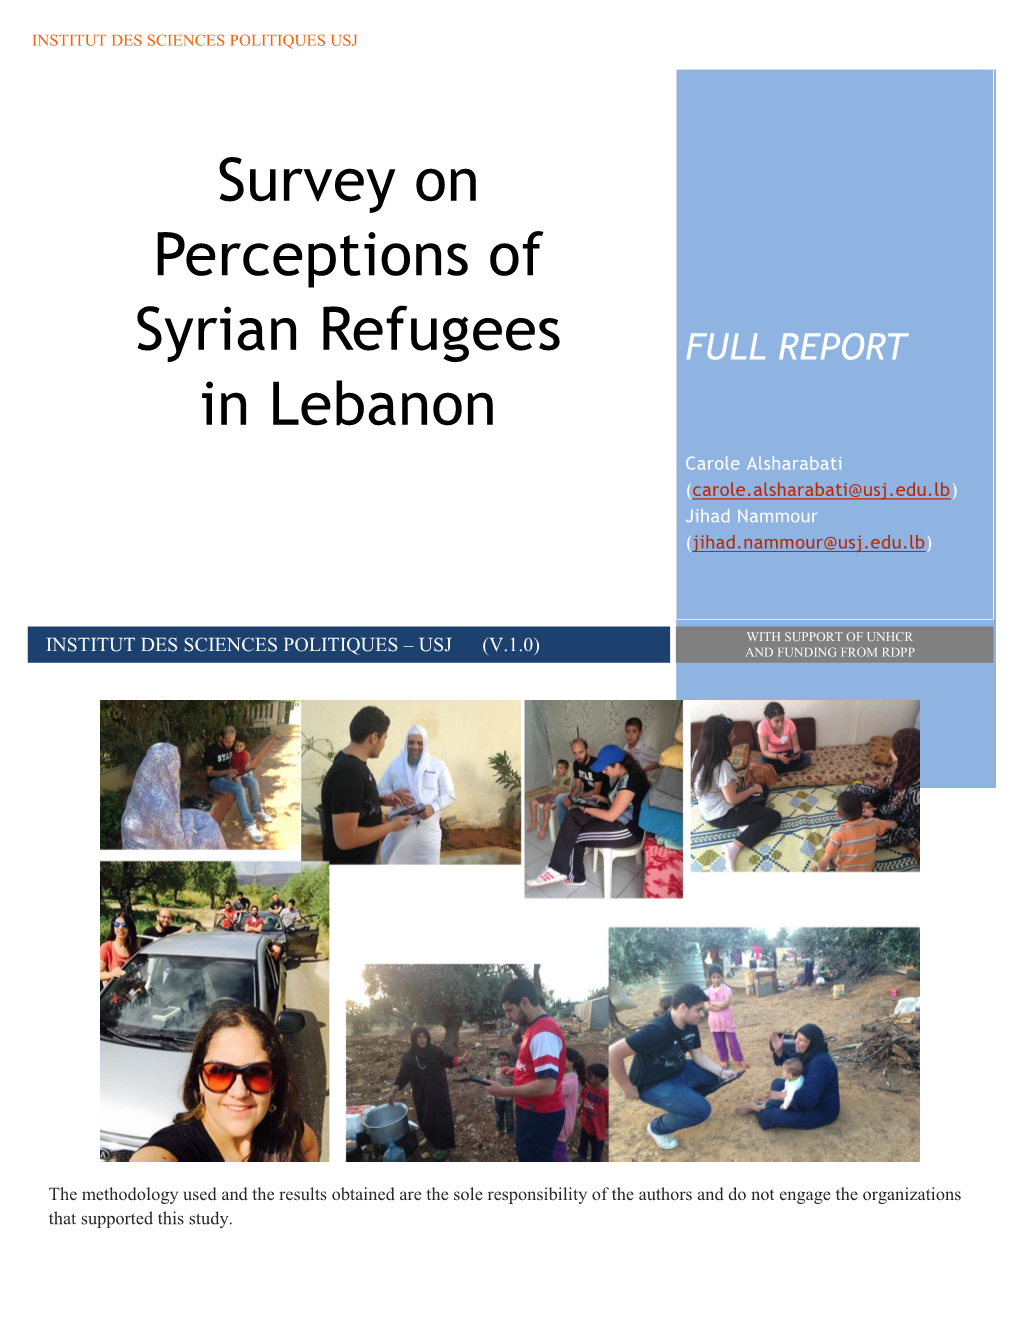 Survey on Perceptions of Syrian Refugees in Lebanon